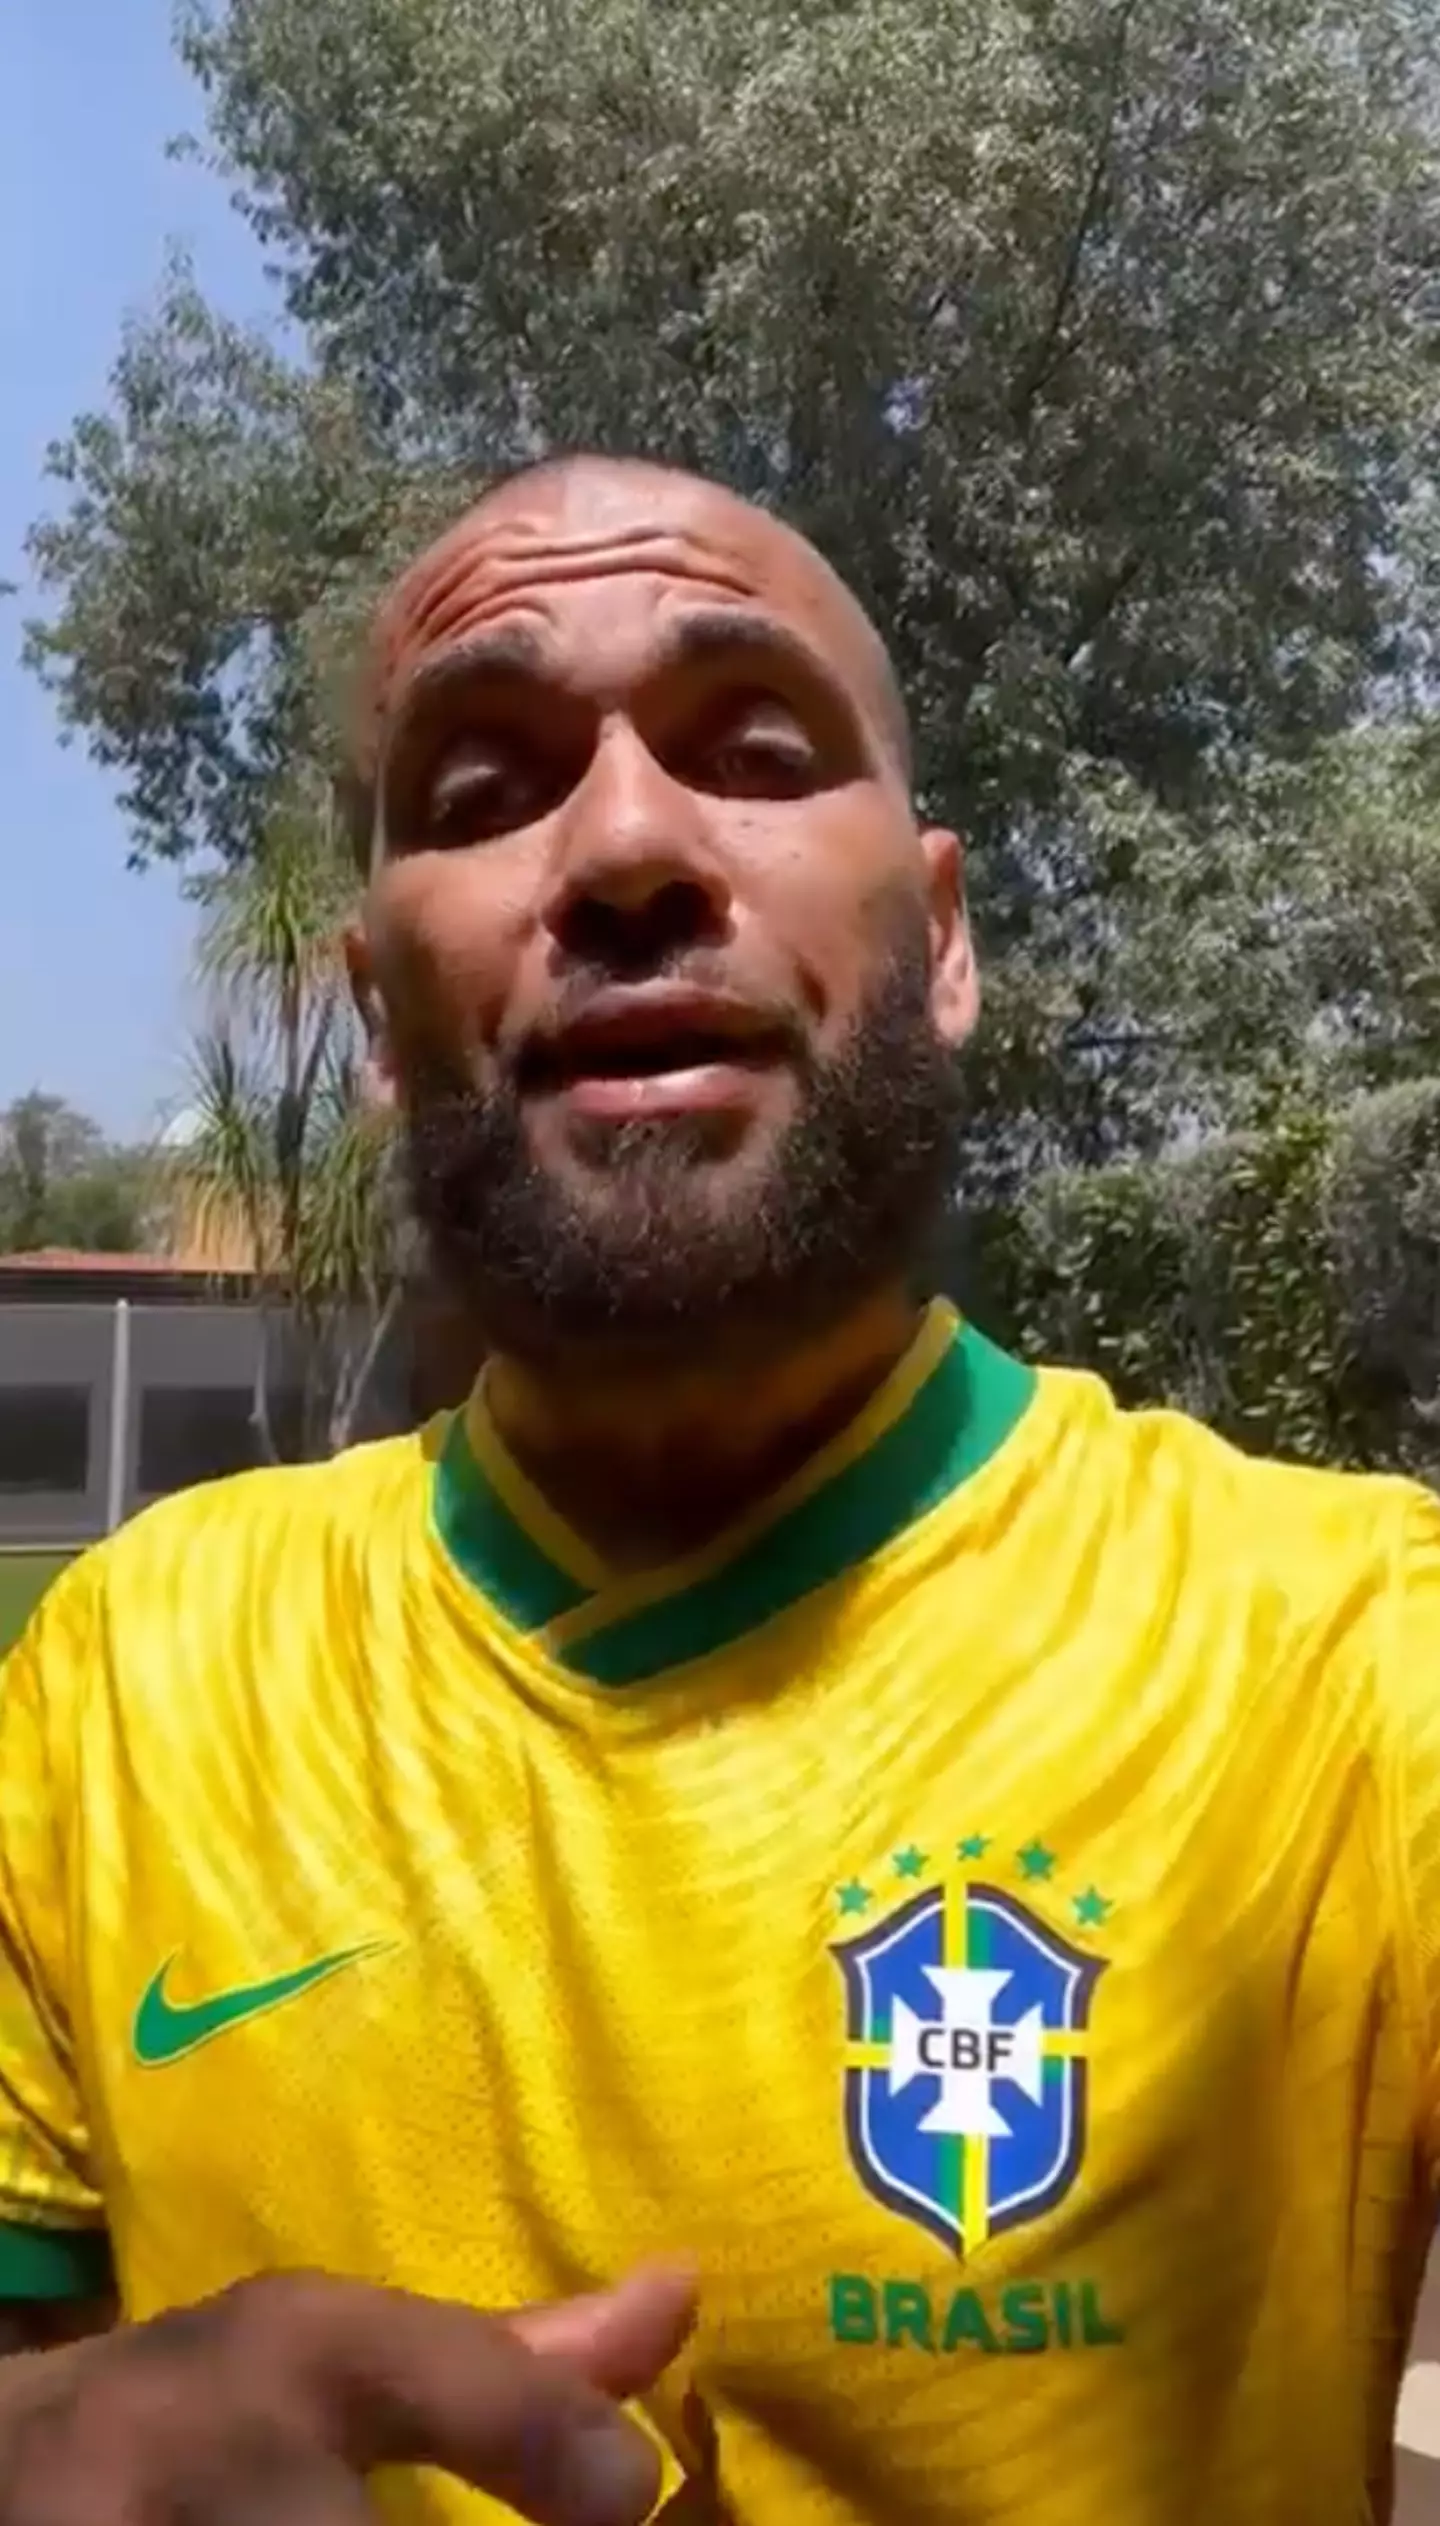 Dani Alves will become Brazil’s oldest World Cup captain in their final group game.